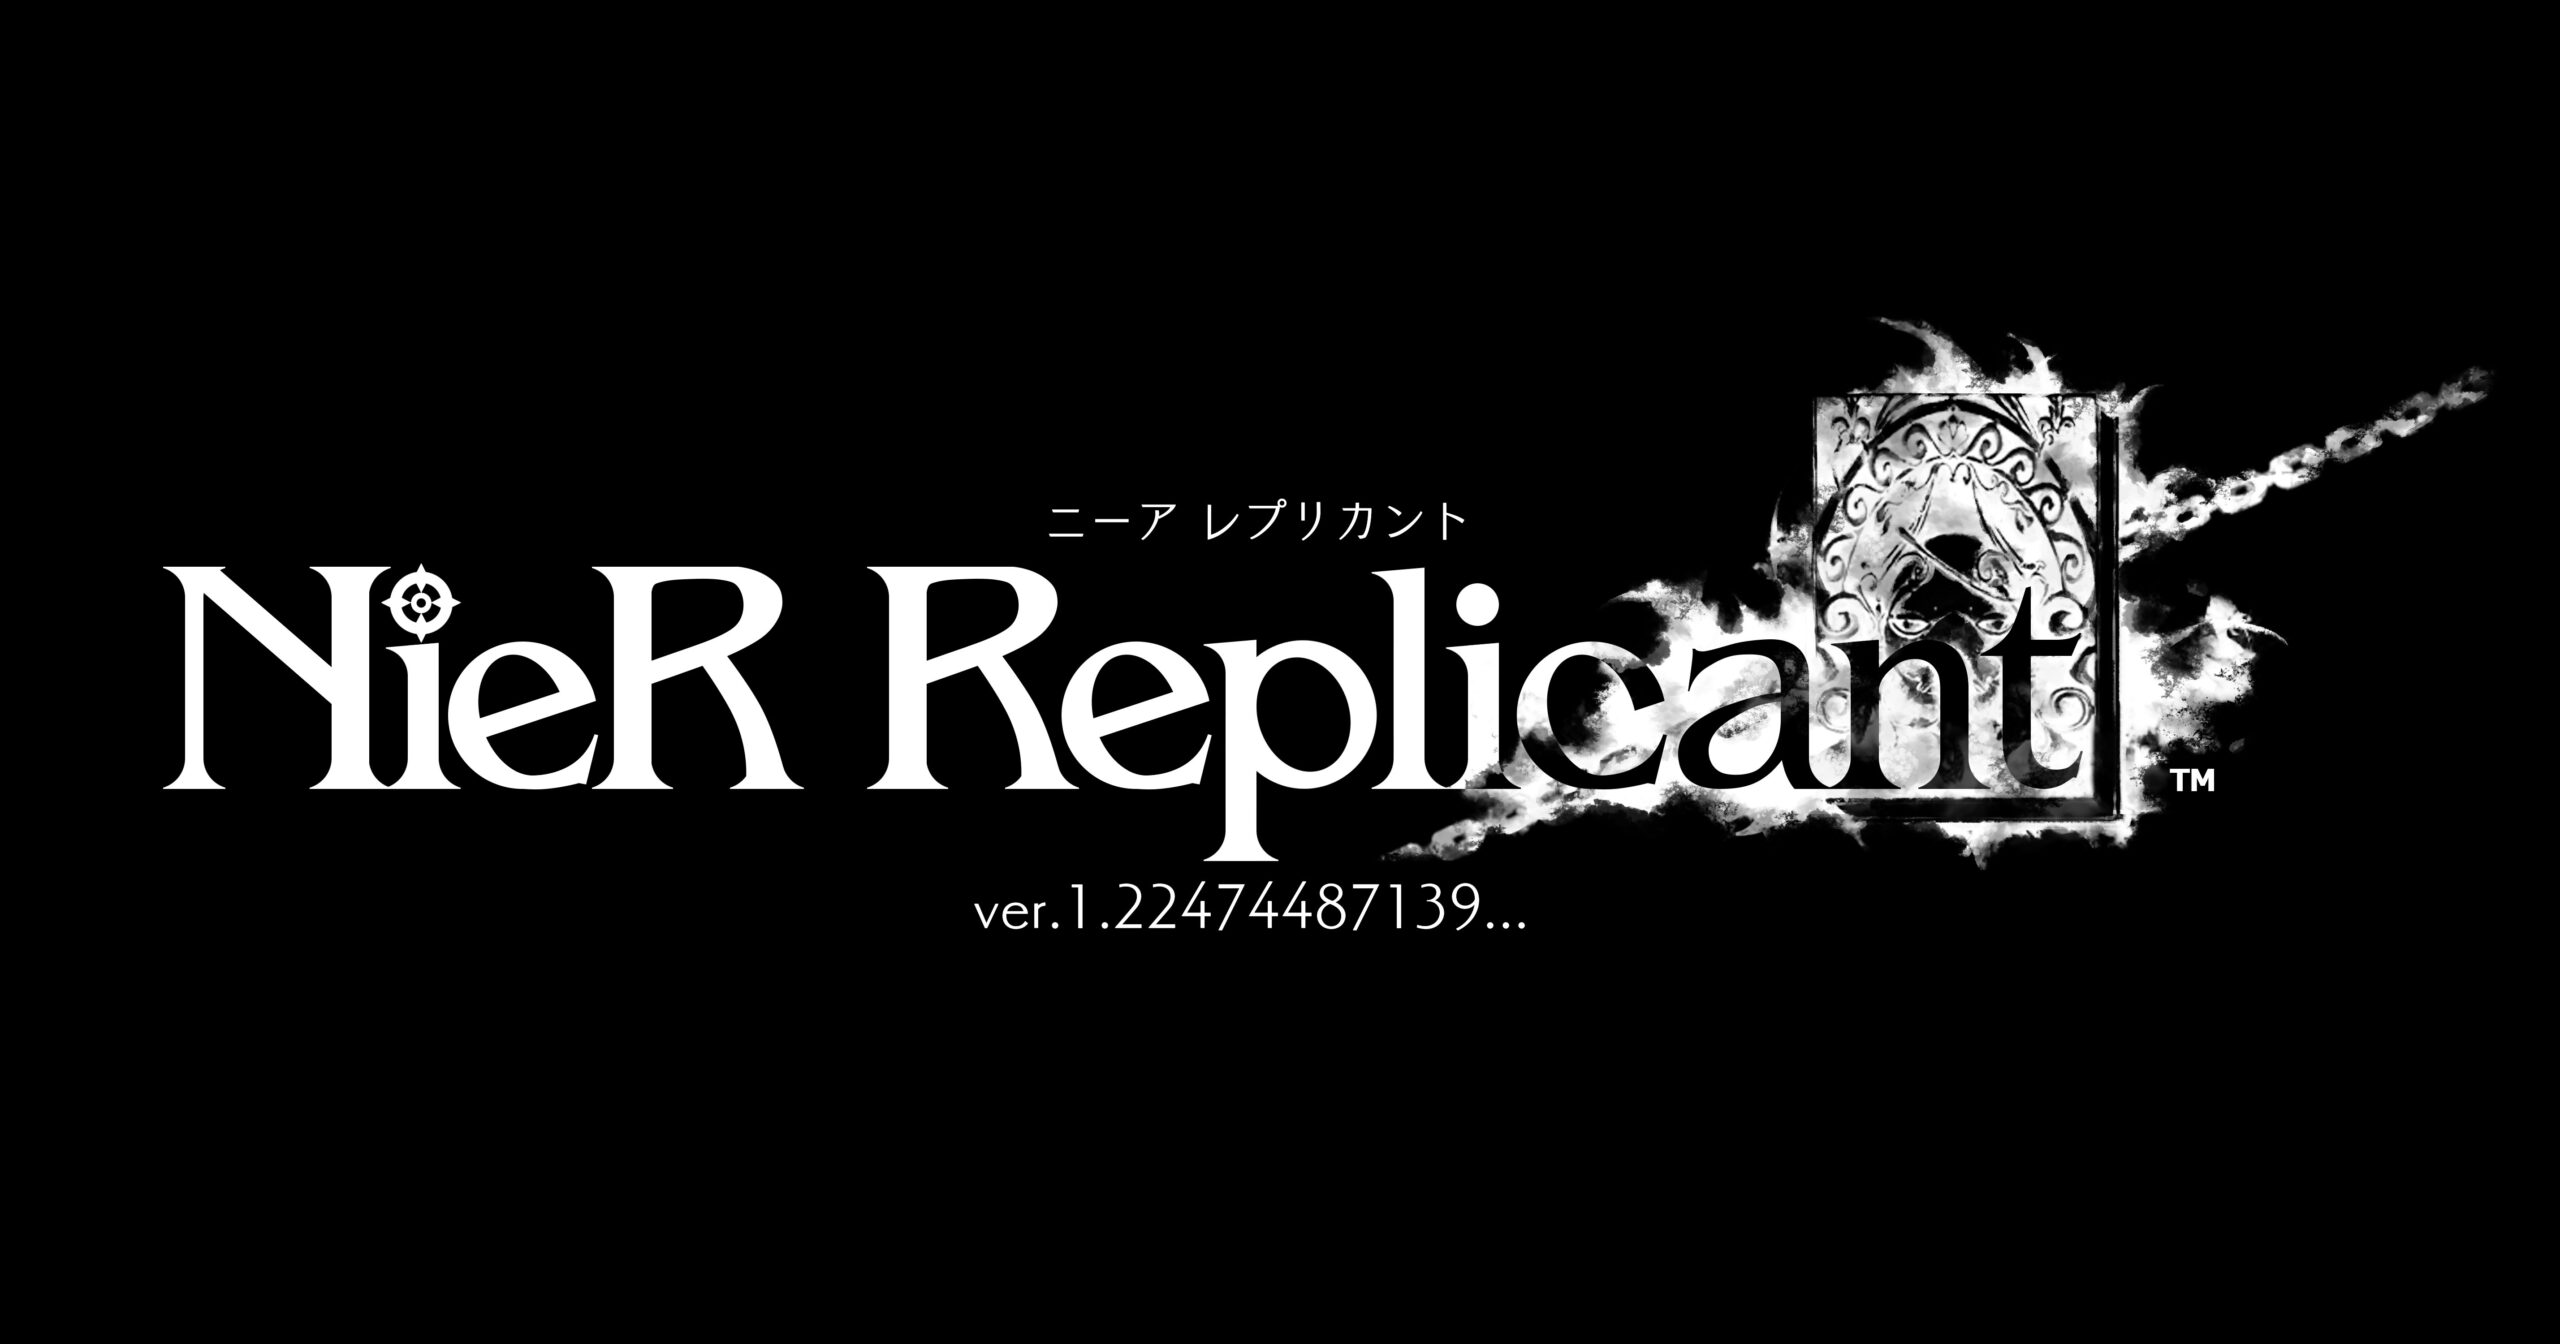 NieR Replicant Upgrade Announced for PC/PS4/XO; Will Feature Fully Voiced,  Re-recorded Voices and New Characters